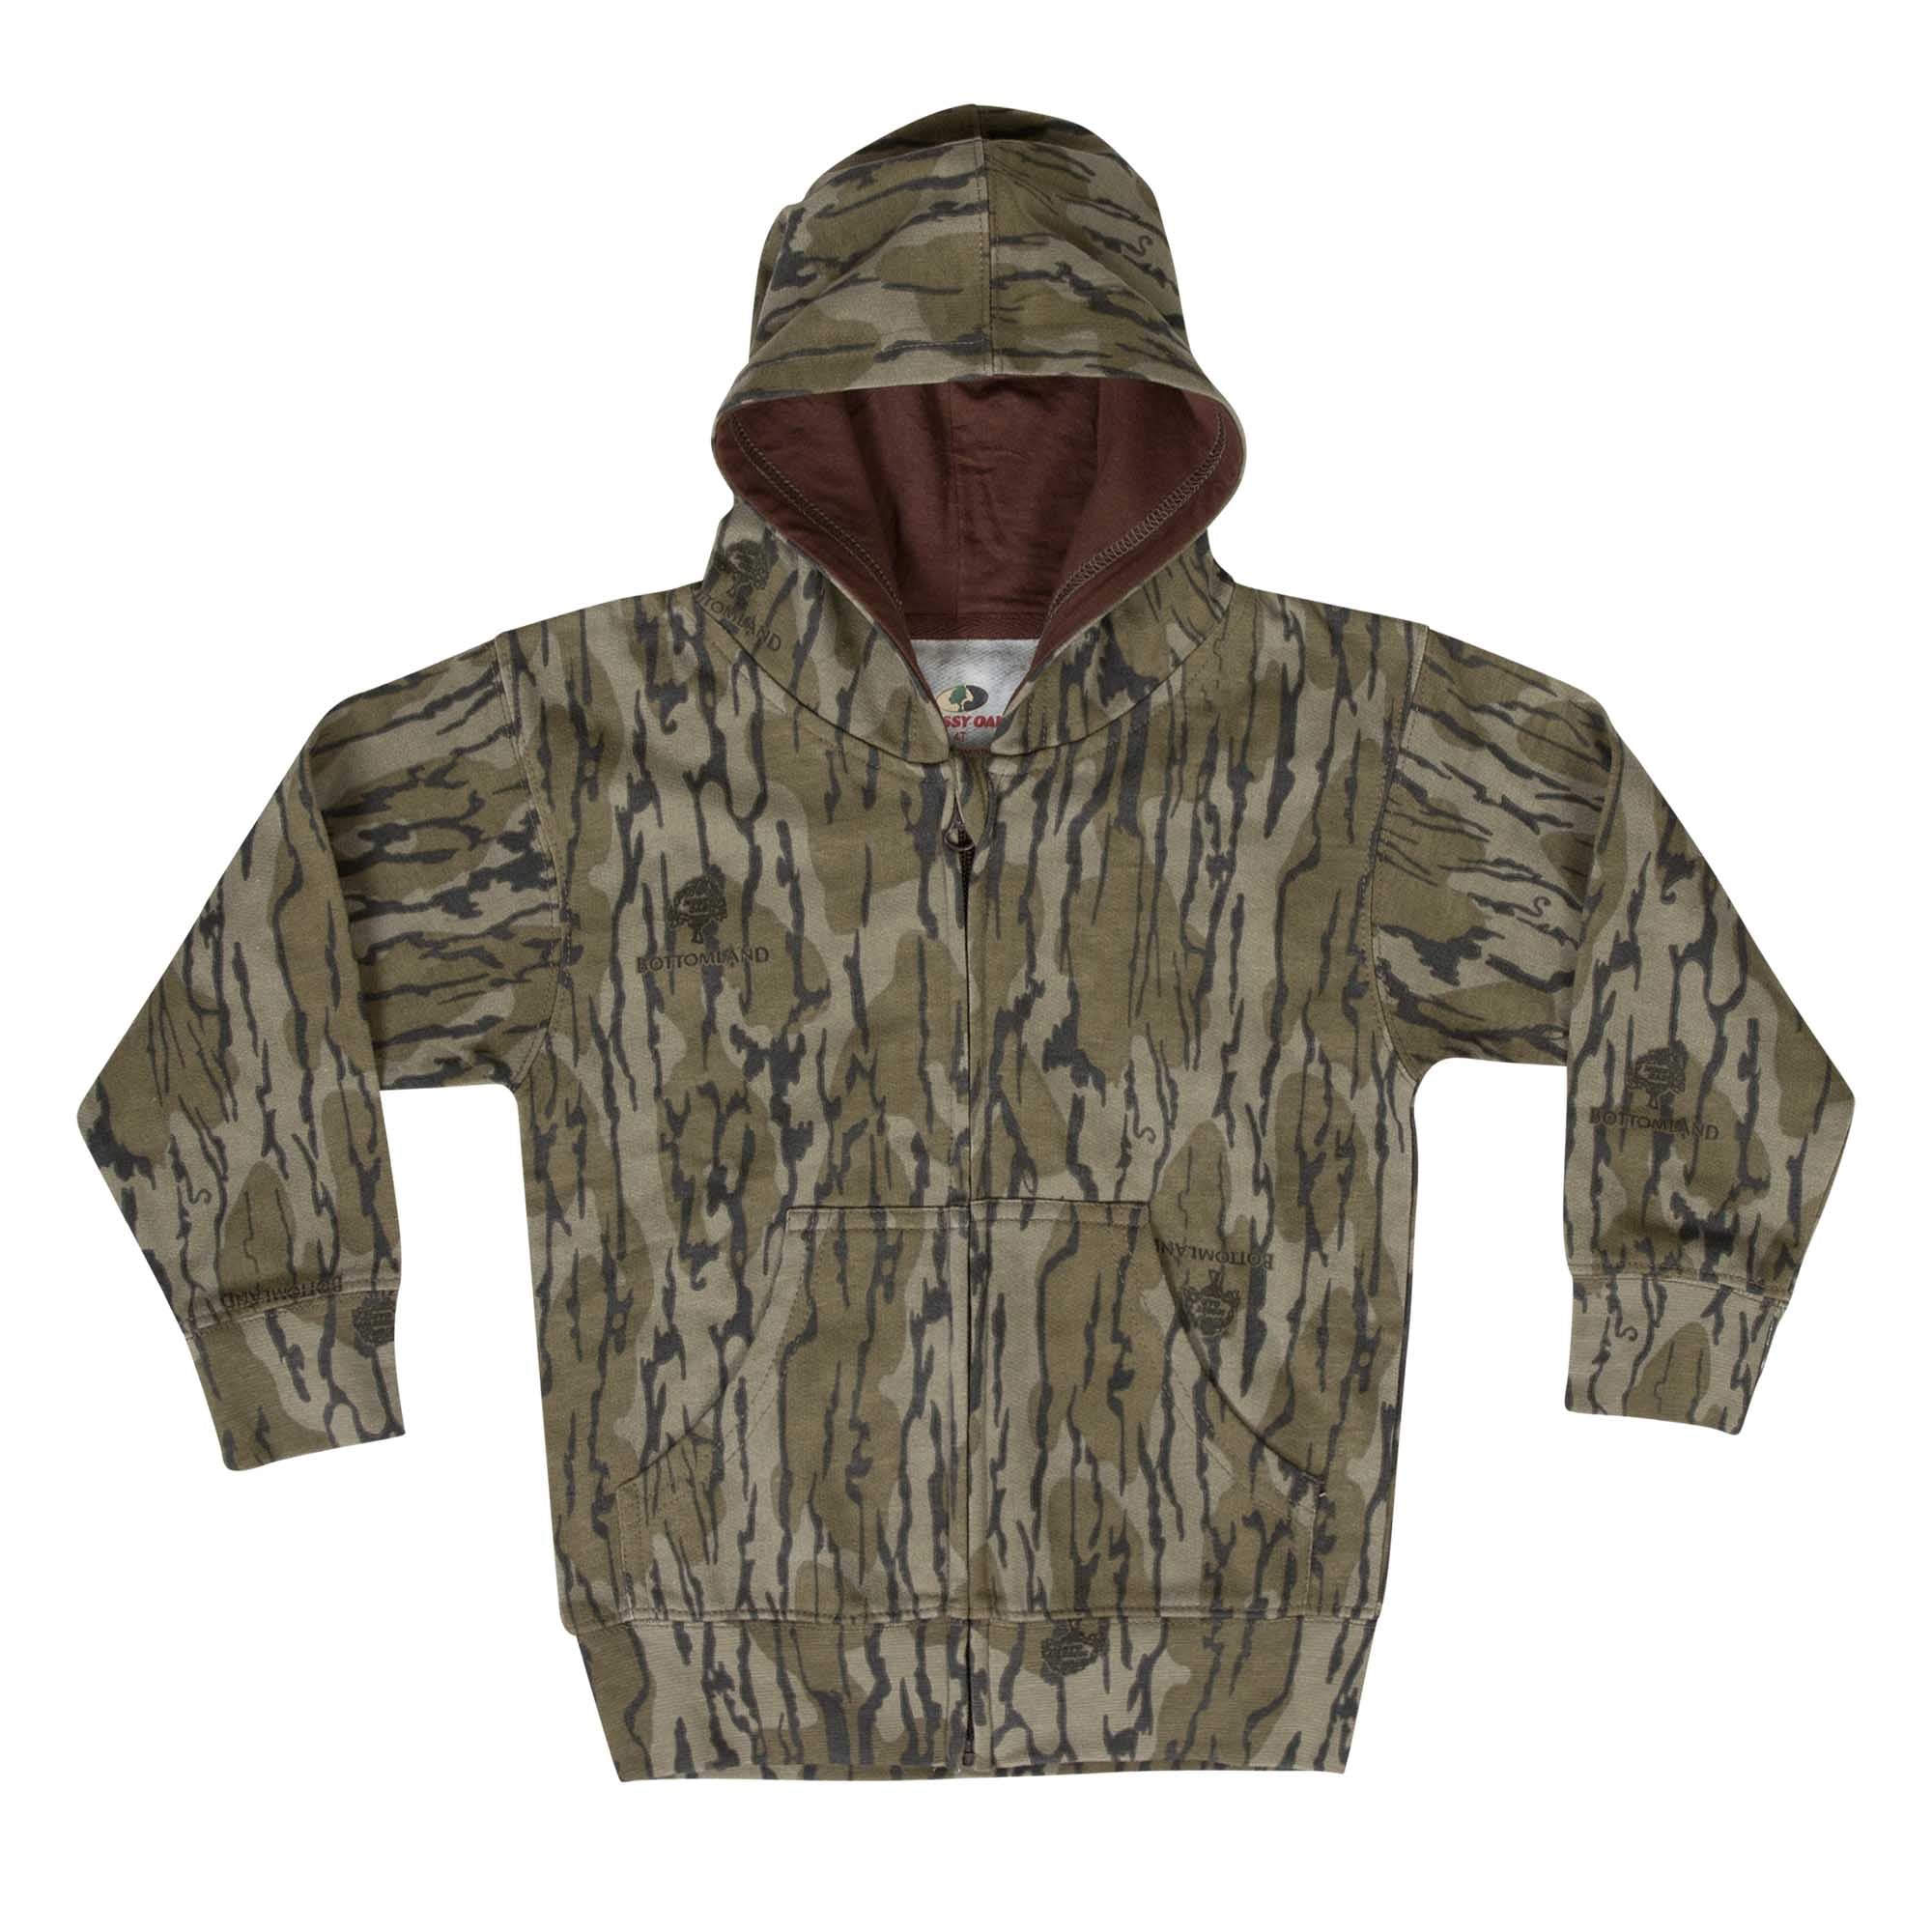 Infant & Boys Mossy Oak Camo Hoodie SIze 0/6 Months Toddler 8/10 